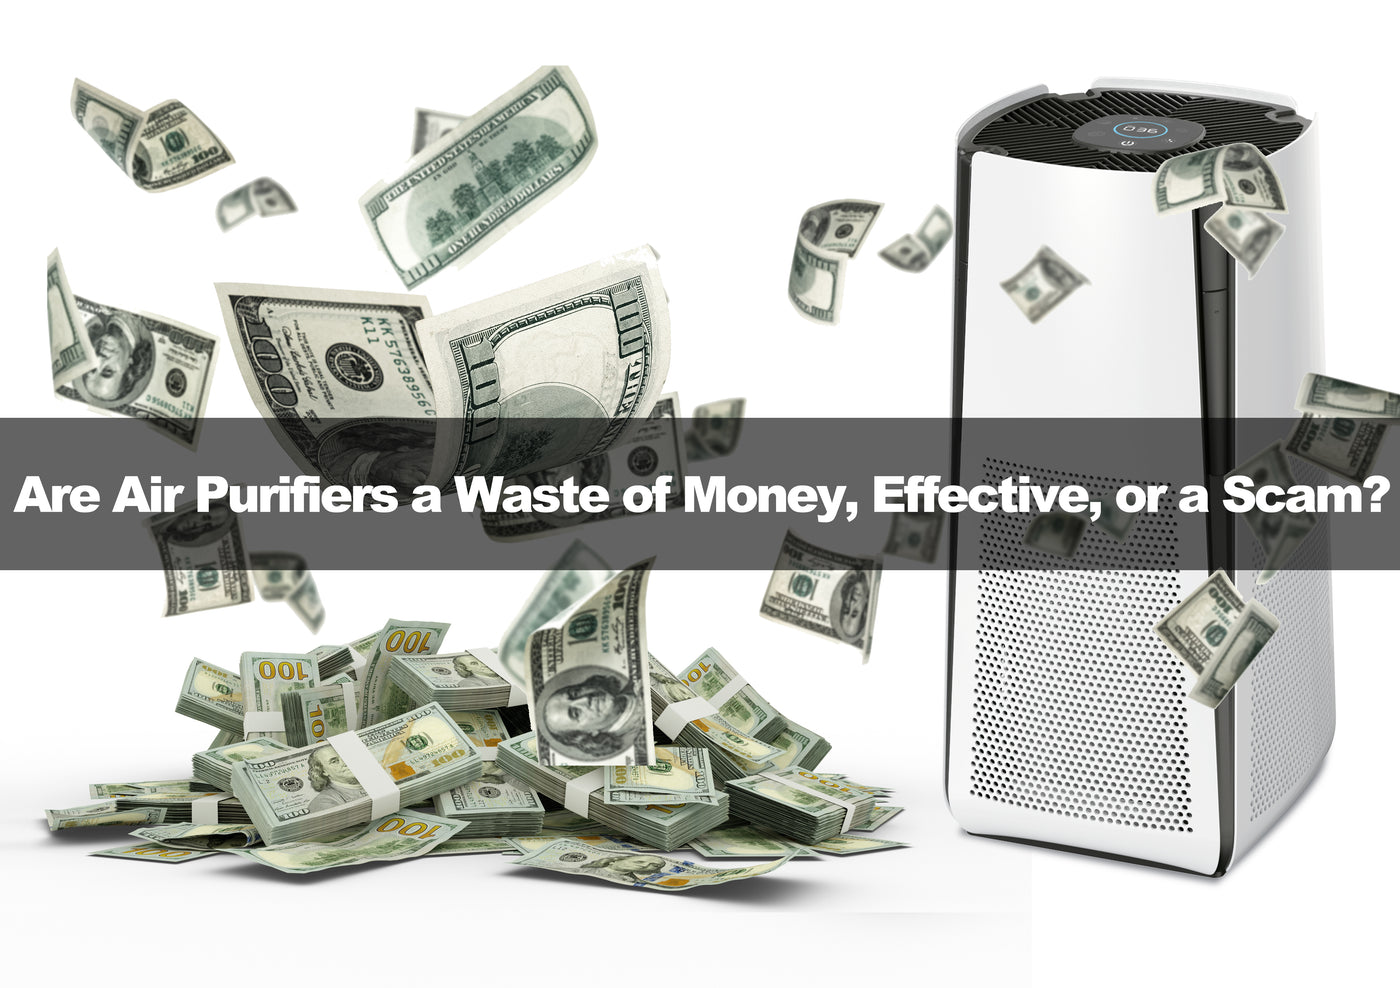 Are Air Purifiers a Waste of Money, Effective, or a Scam?